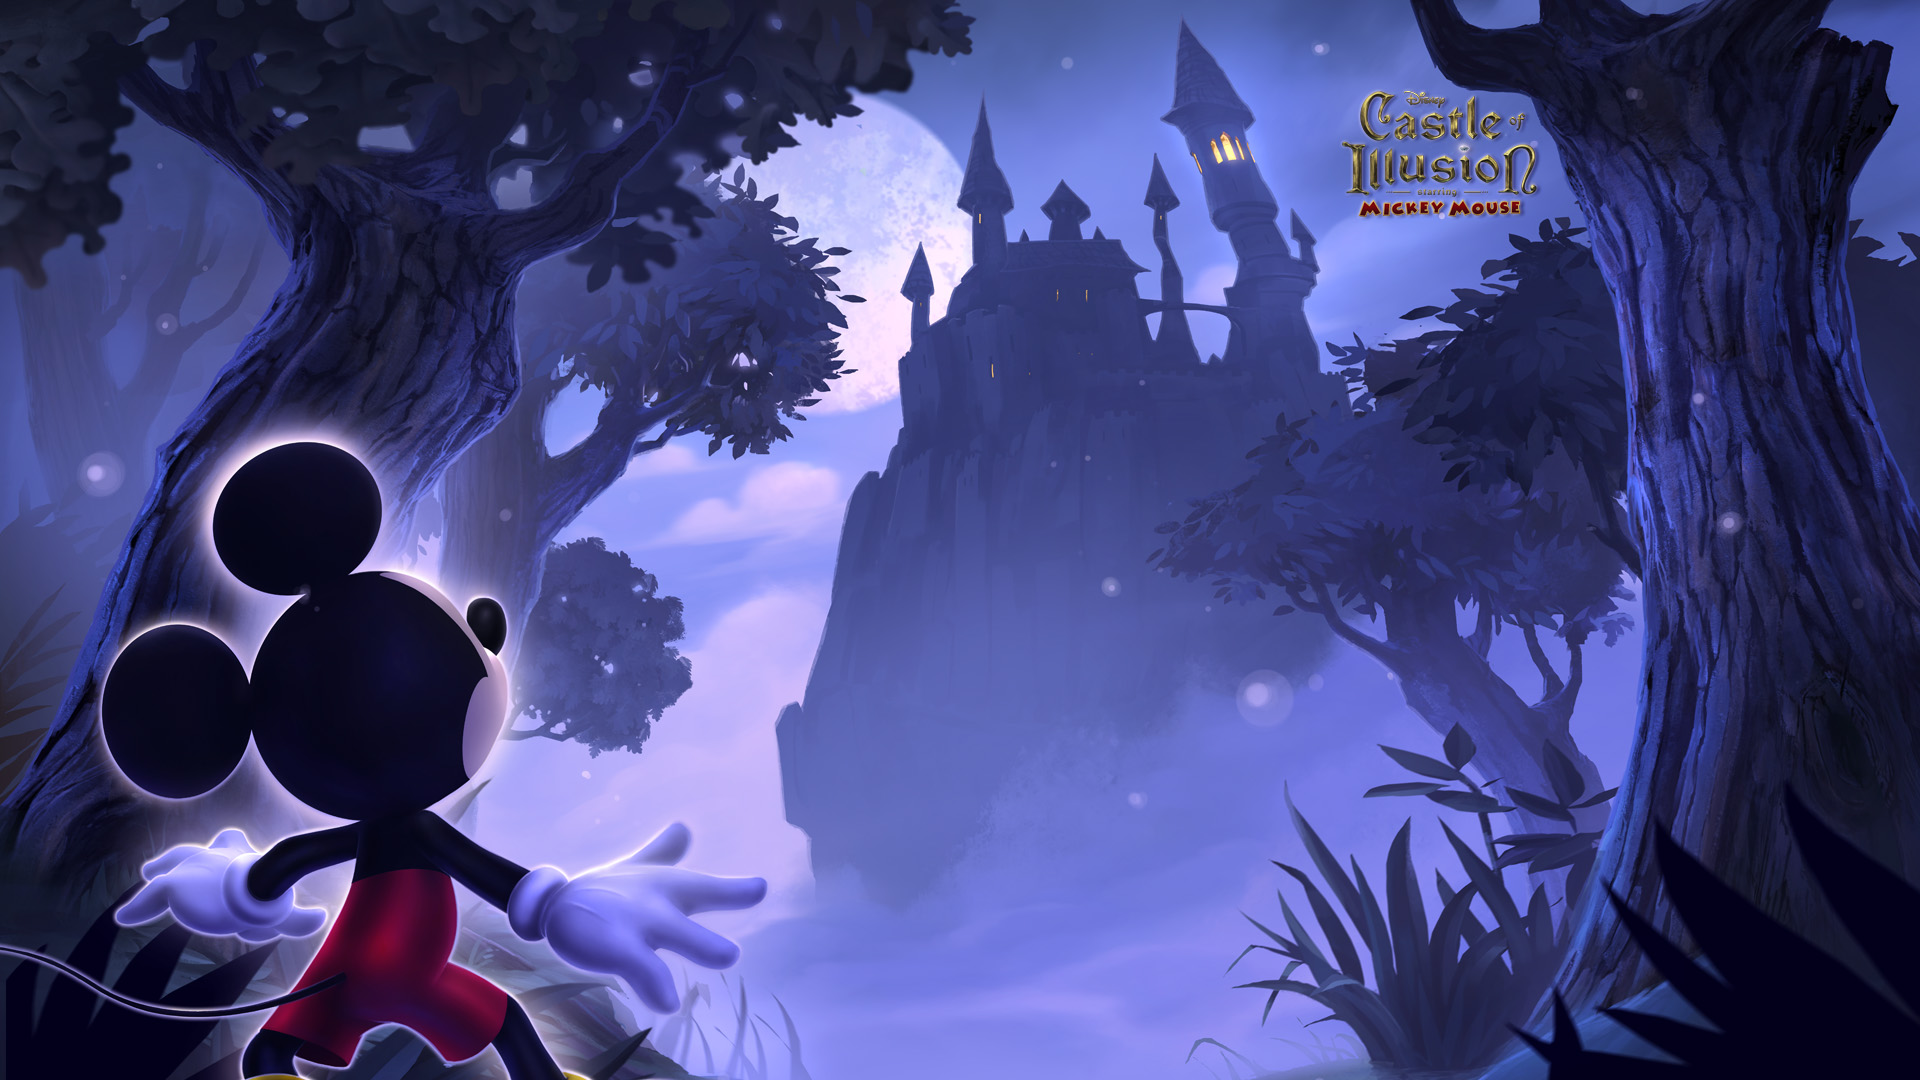 castle-of-illusion-mickey mouse